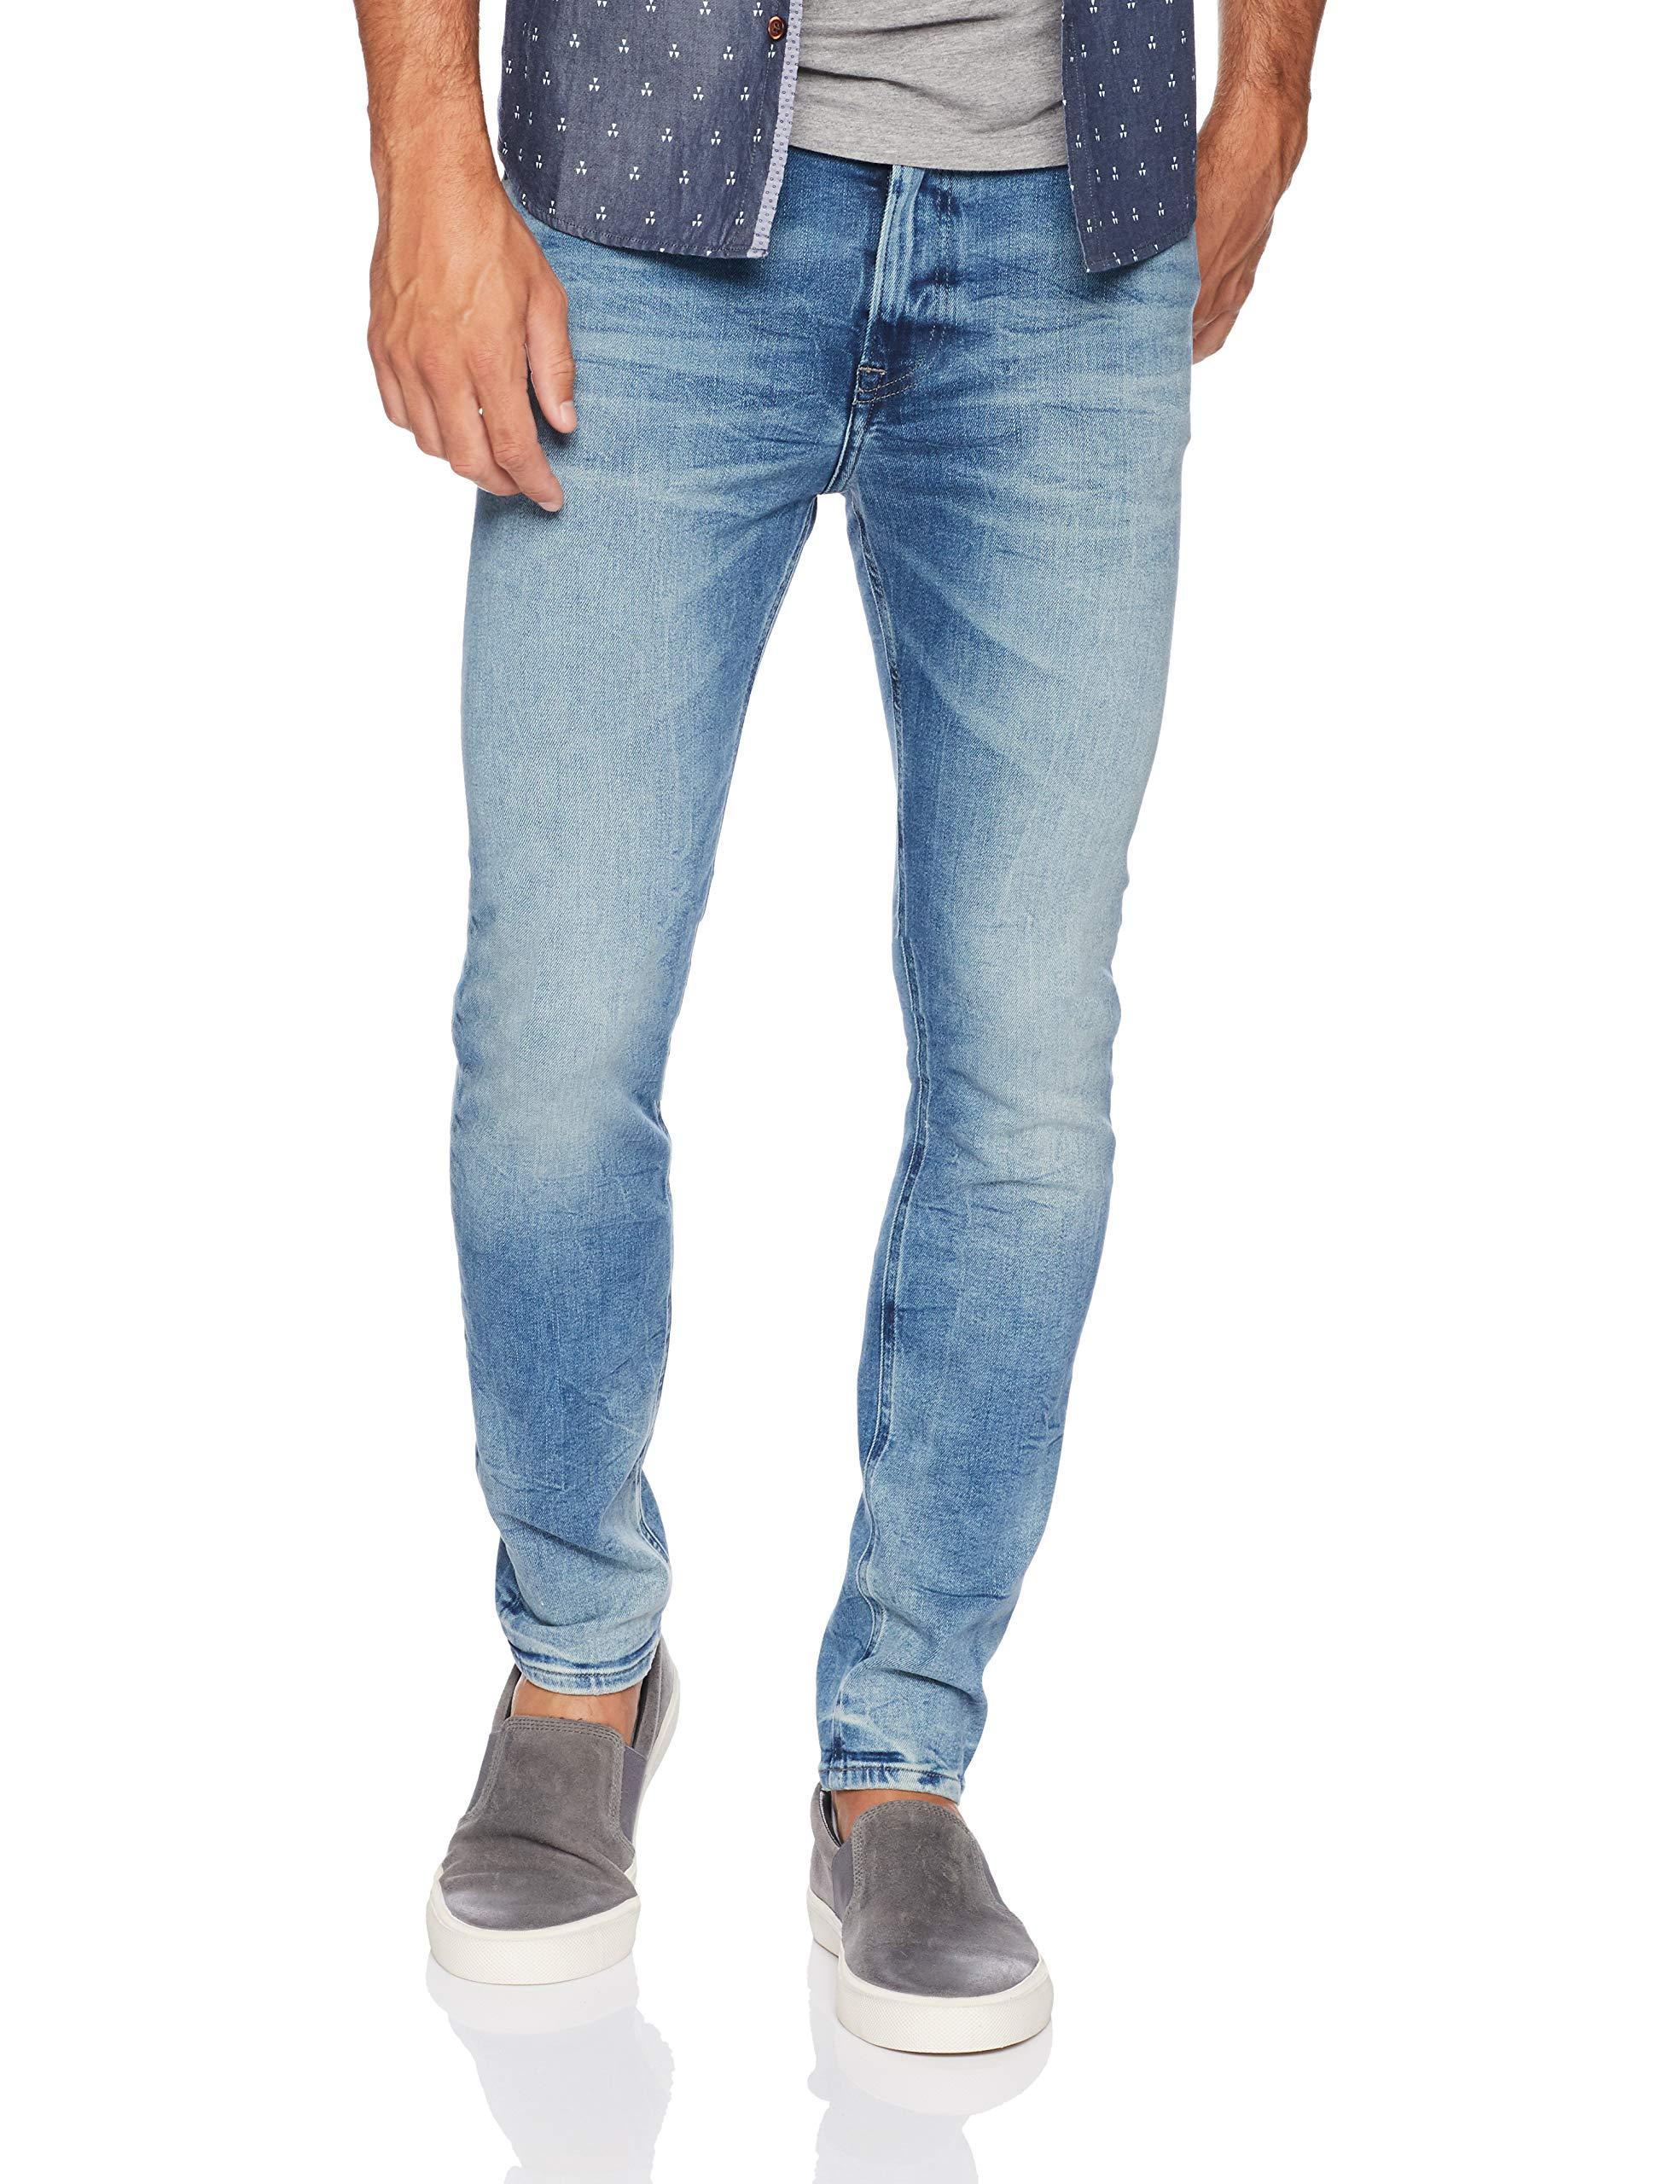 Tommy Hilfiger Simon Skinny Jeans Top Sellers, 53% OFF | www.accede-web.com